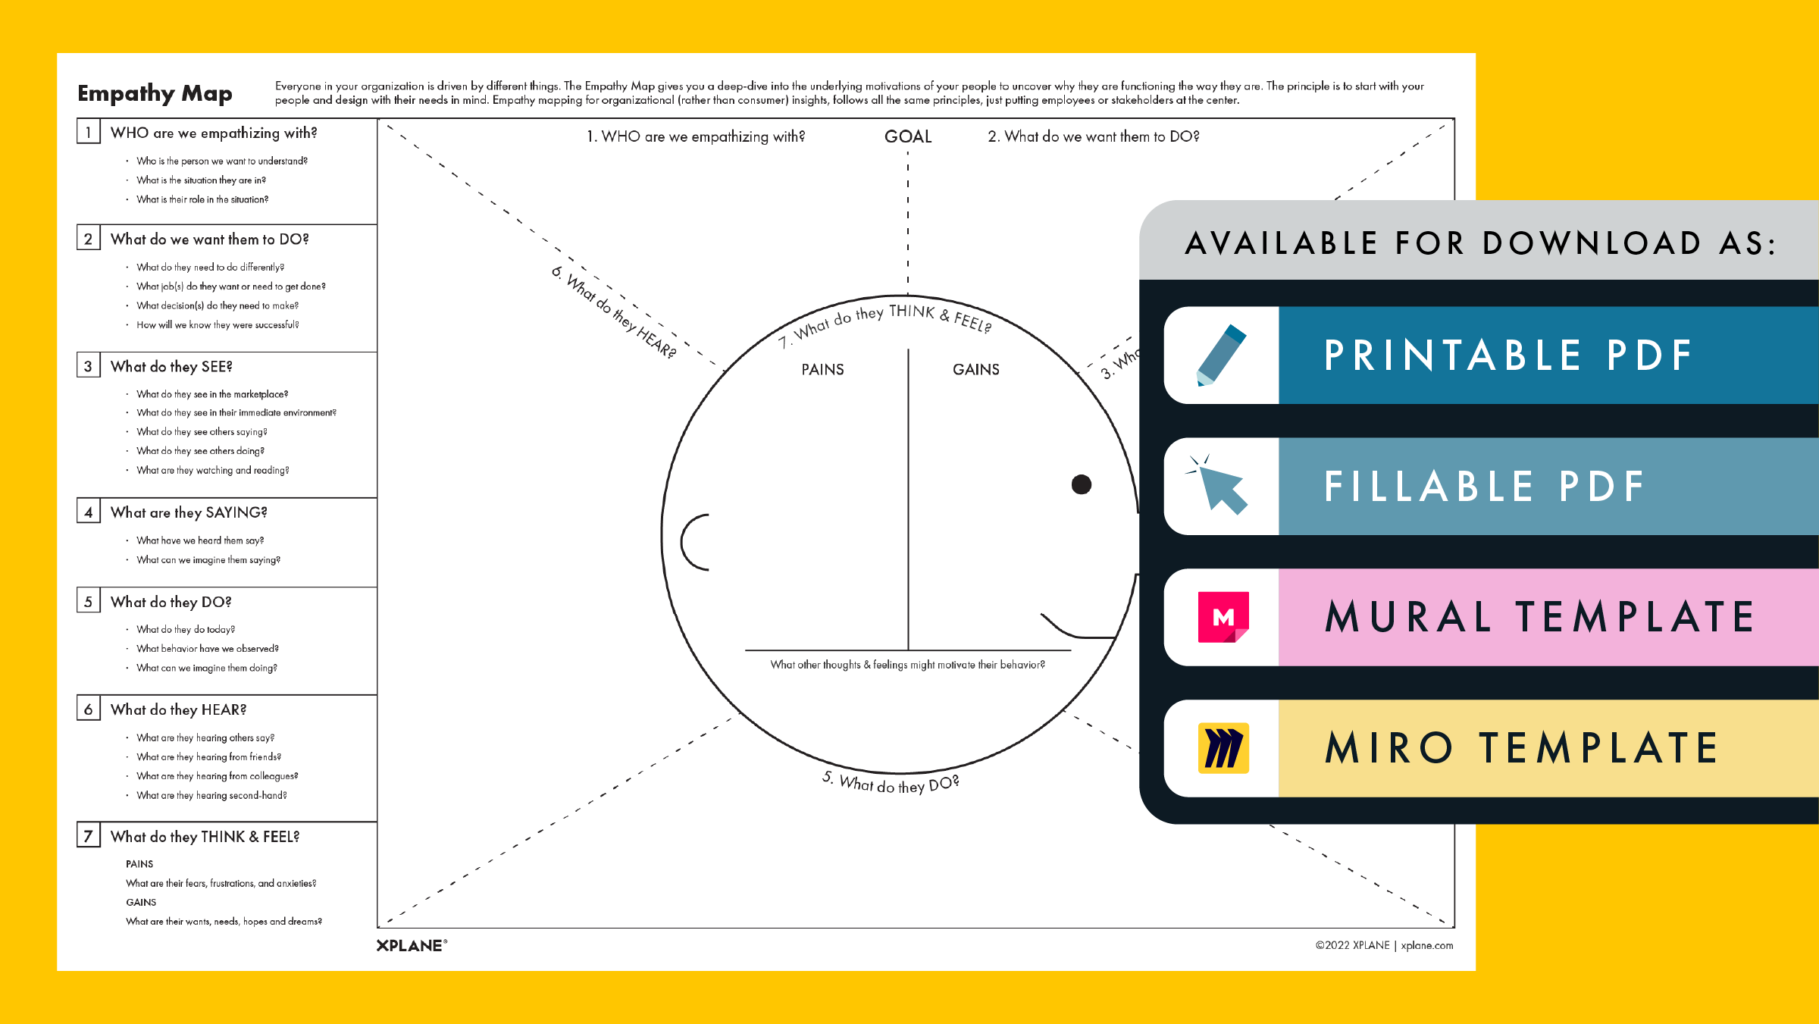 Empathy Map worksheet against a yellow background. Four tabs under the header "AVAILABLE FOR DOWNLOAD AS" indicate available file types available.